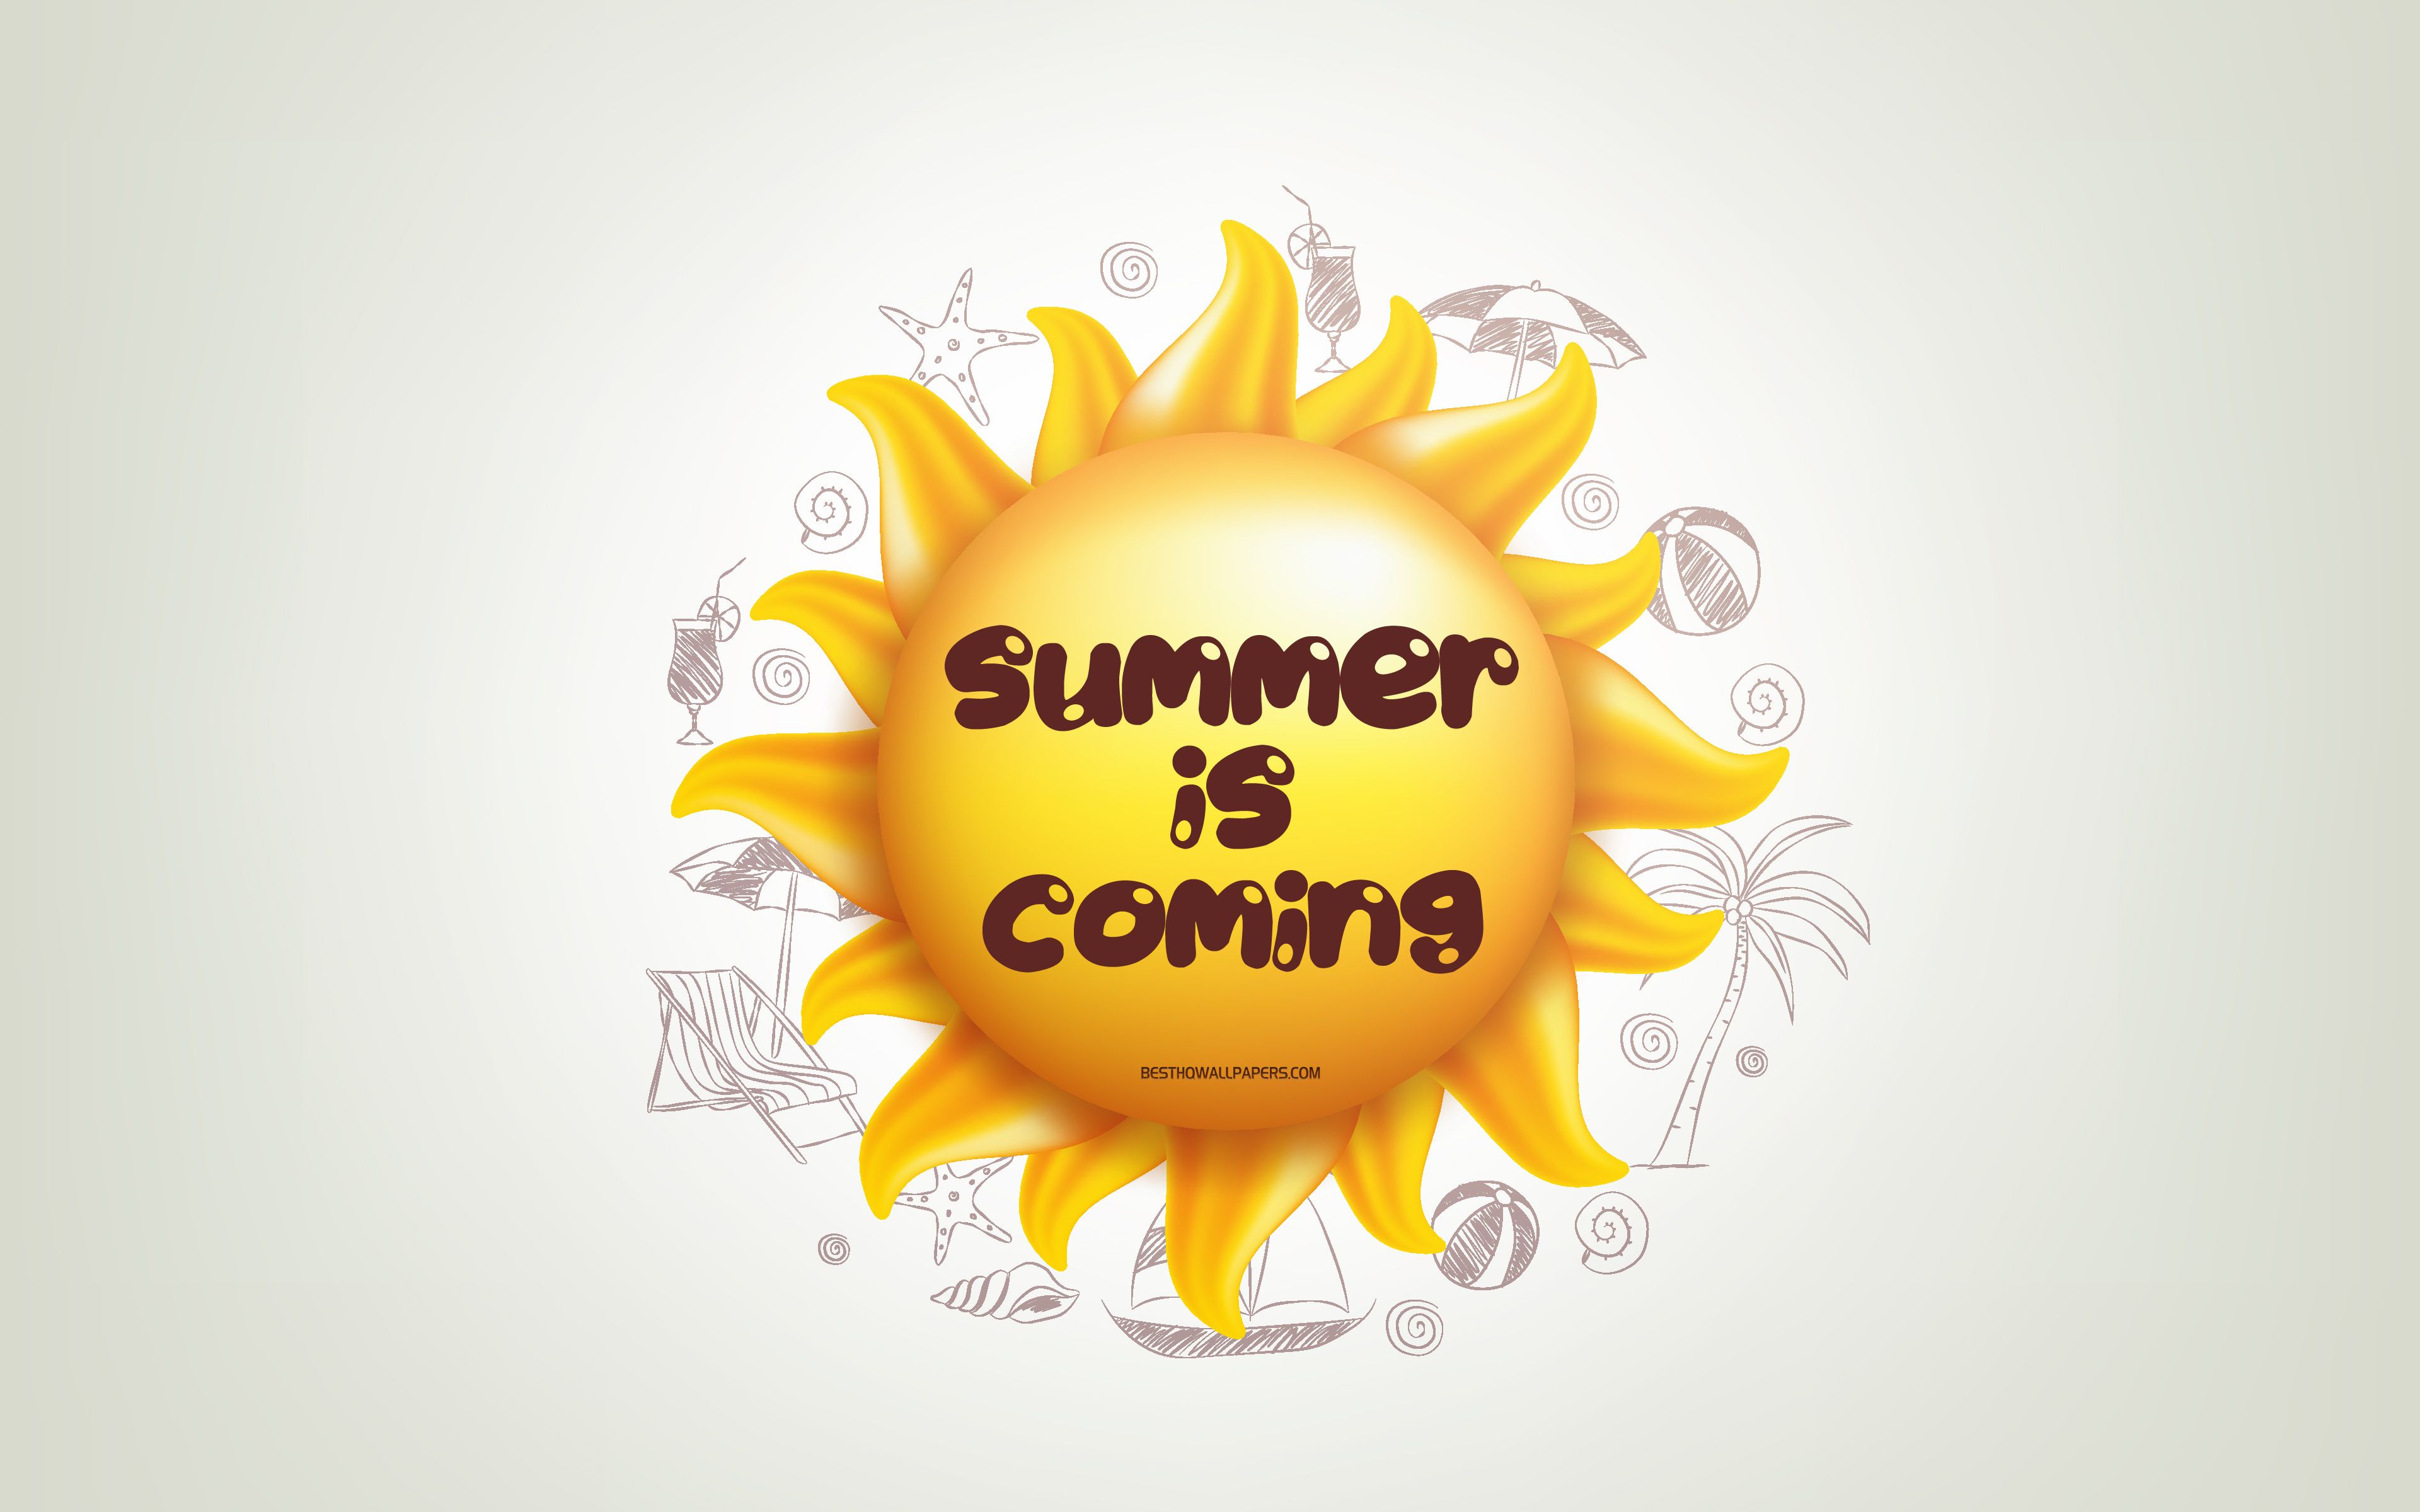 Download wallpaper Summer is coming, 3D sun, positive quotes, 3D art, Summer is coming concepts, creative art, quotes about summer, motivation quotes for desktop with resolution 3840x2400. High Quality HD picture wallpaper